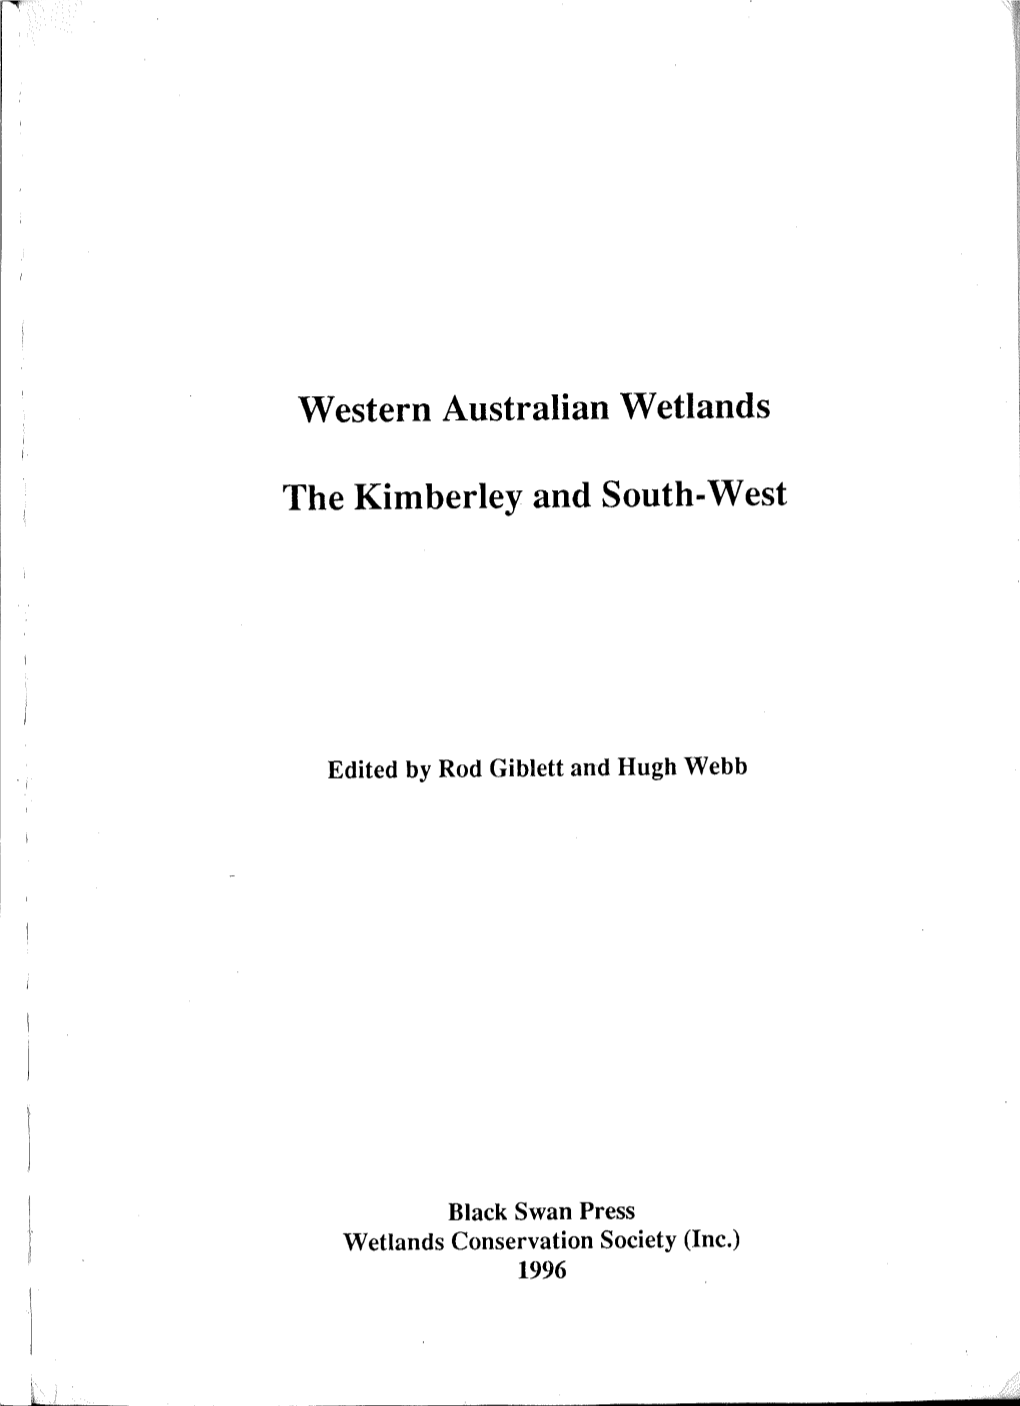 Western Australian Wetlands the Kimberley and South-West